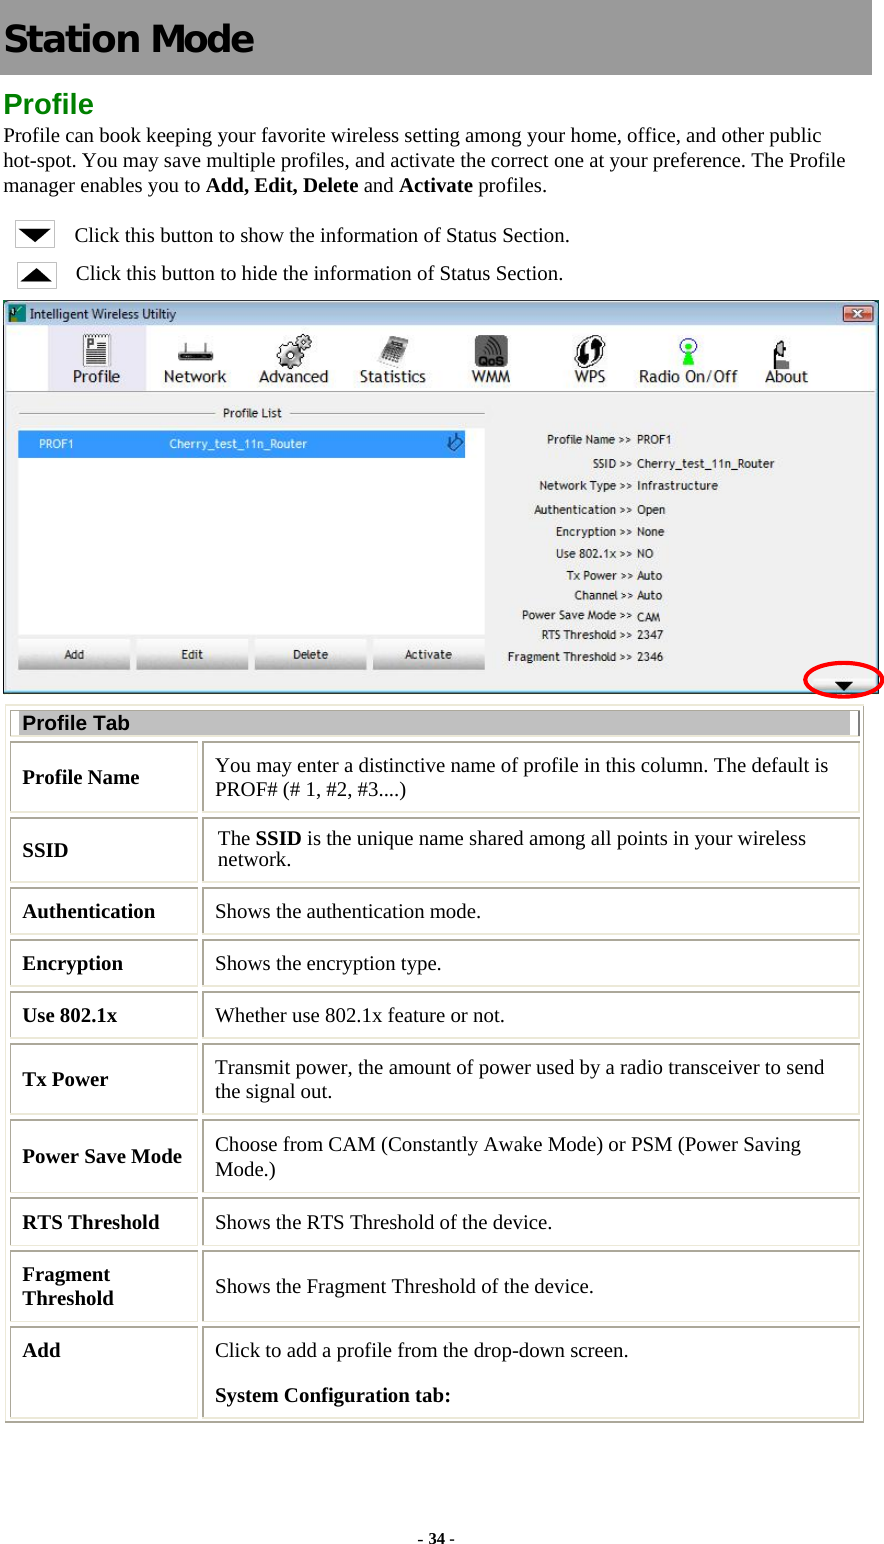   Station Mode Profile Profile can book keeping your favorite wireless setting among your home, office, and other public hot-spot. You may save multiple profiles, and activate the correct one at your preference. The Profile manager enables you to Add, Edit, Delete and Activate profiles. Click this button to show the information of Status Section. Click this button to hide the information of Status Section.  Profile Tab Profile Name  You may enter a distinctive name of profile in this column. The default is PROF# (# 1, #2, #3....) SSID  The SSID is the unique name shared among all points in your wireless network. Authentication  Shows the authentication mode. Encryption  Shows the encryption type. Use 802.1x    Whether use 802.1x feature or not. Tx Power    Transmit power, the amount of power used by a radio transceiver to send the signal out. Power Save Mode Choose from CAM (Constantly Awake Mode) or PSM (Power Saving Mode.) RTS Threshold  Shows the RTS Threshold of the device. Fragment Threshold  Shows the Fragment Threshold of the device. Add  Click to add a profile from the drop-down screen. System Configuration tab: - 34 - 